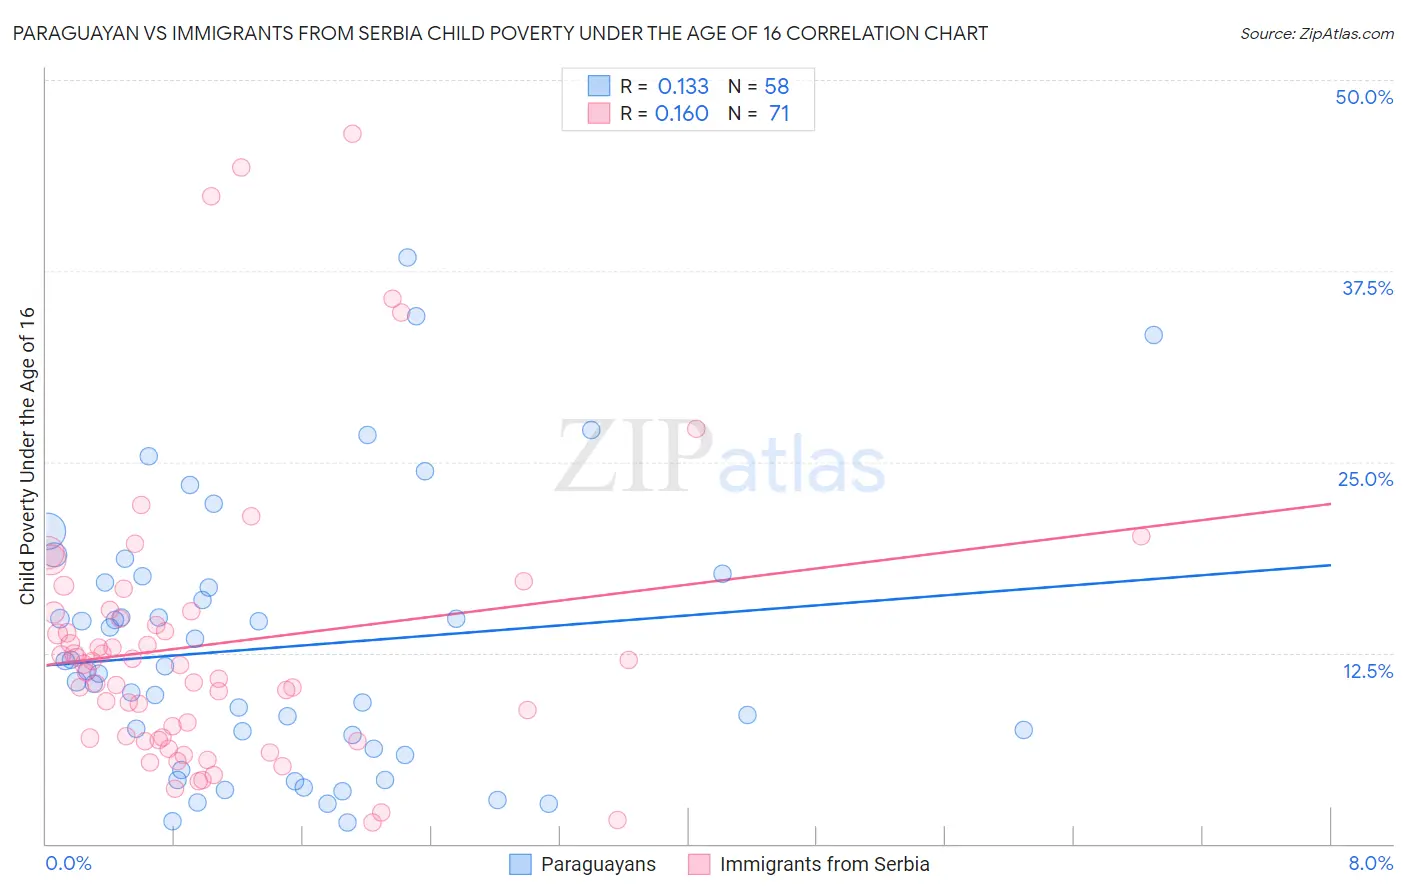 Paraguayan vs Immigrants from Serbia Child Poverty Under the Age of 16